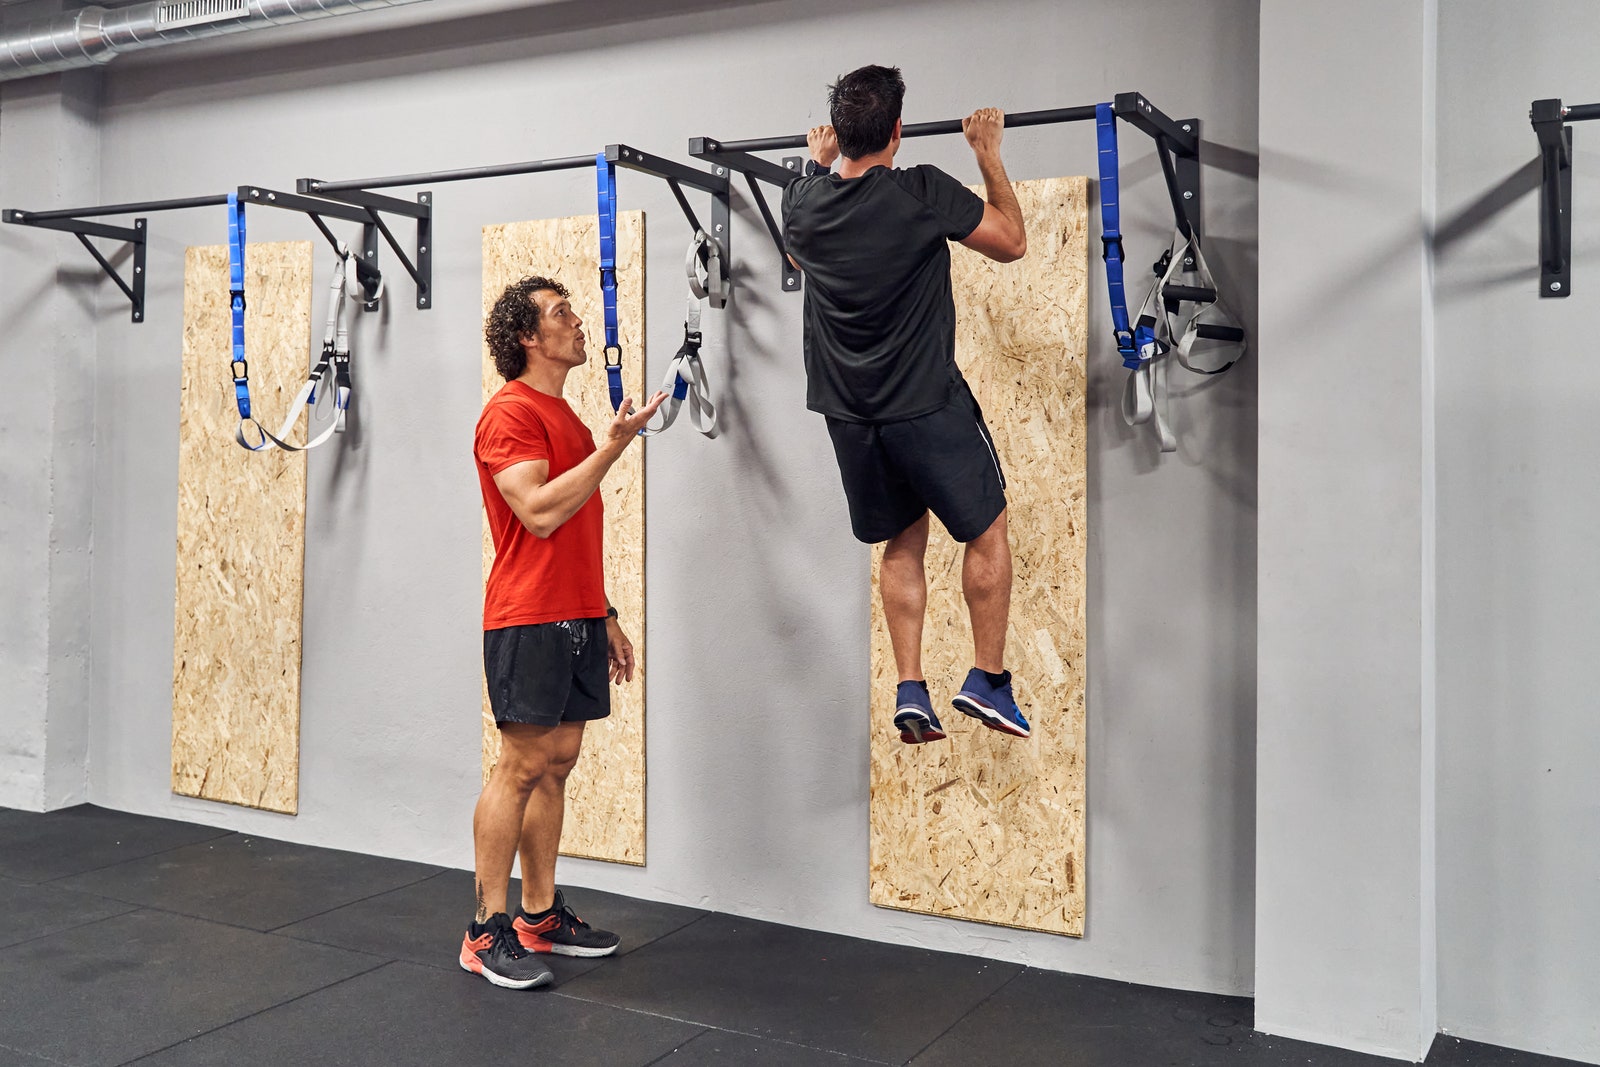 Improve your pullup and chinup technique with these six exercises